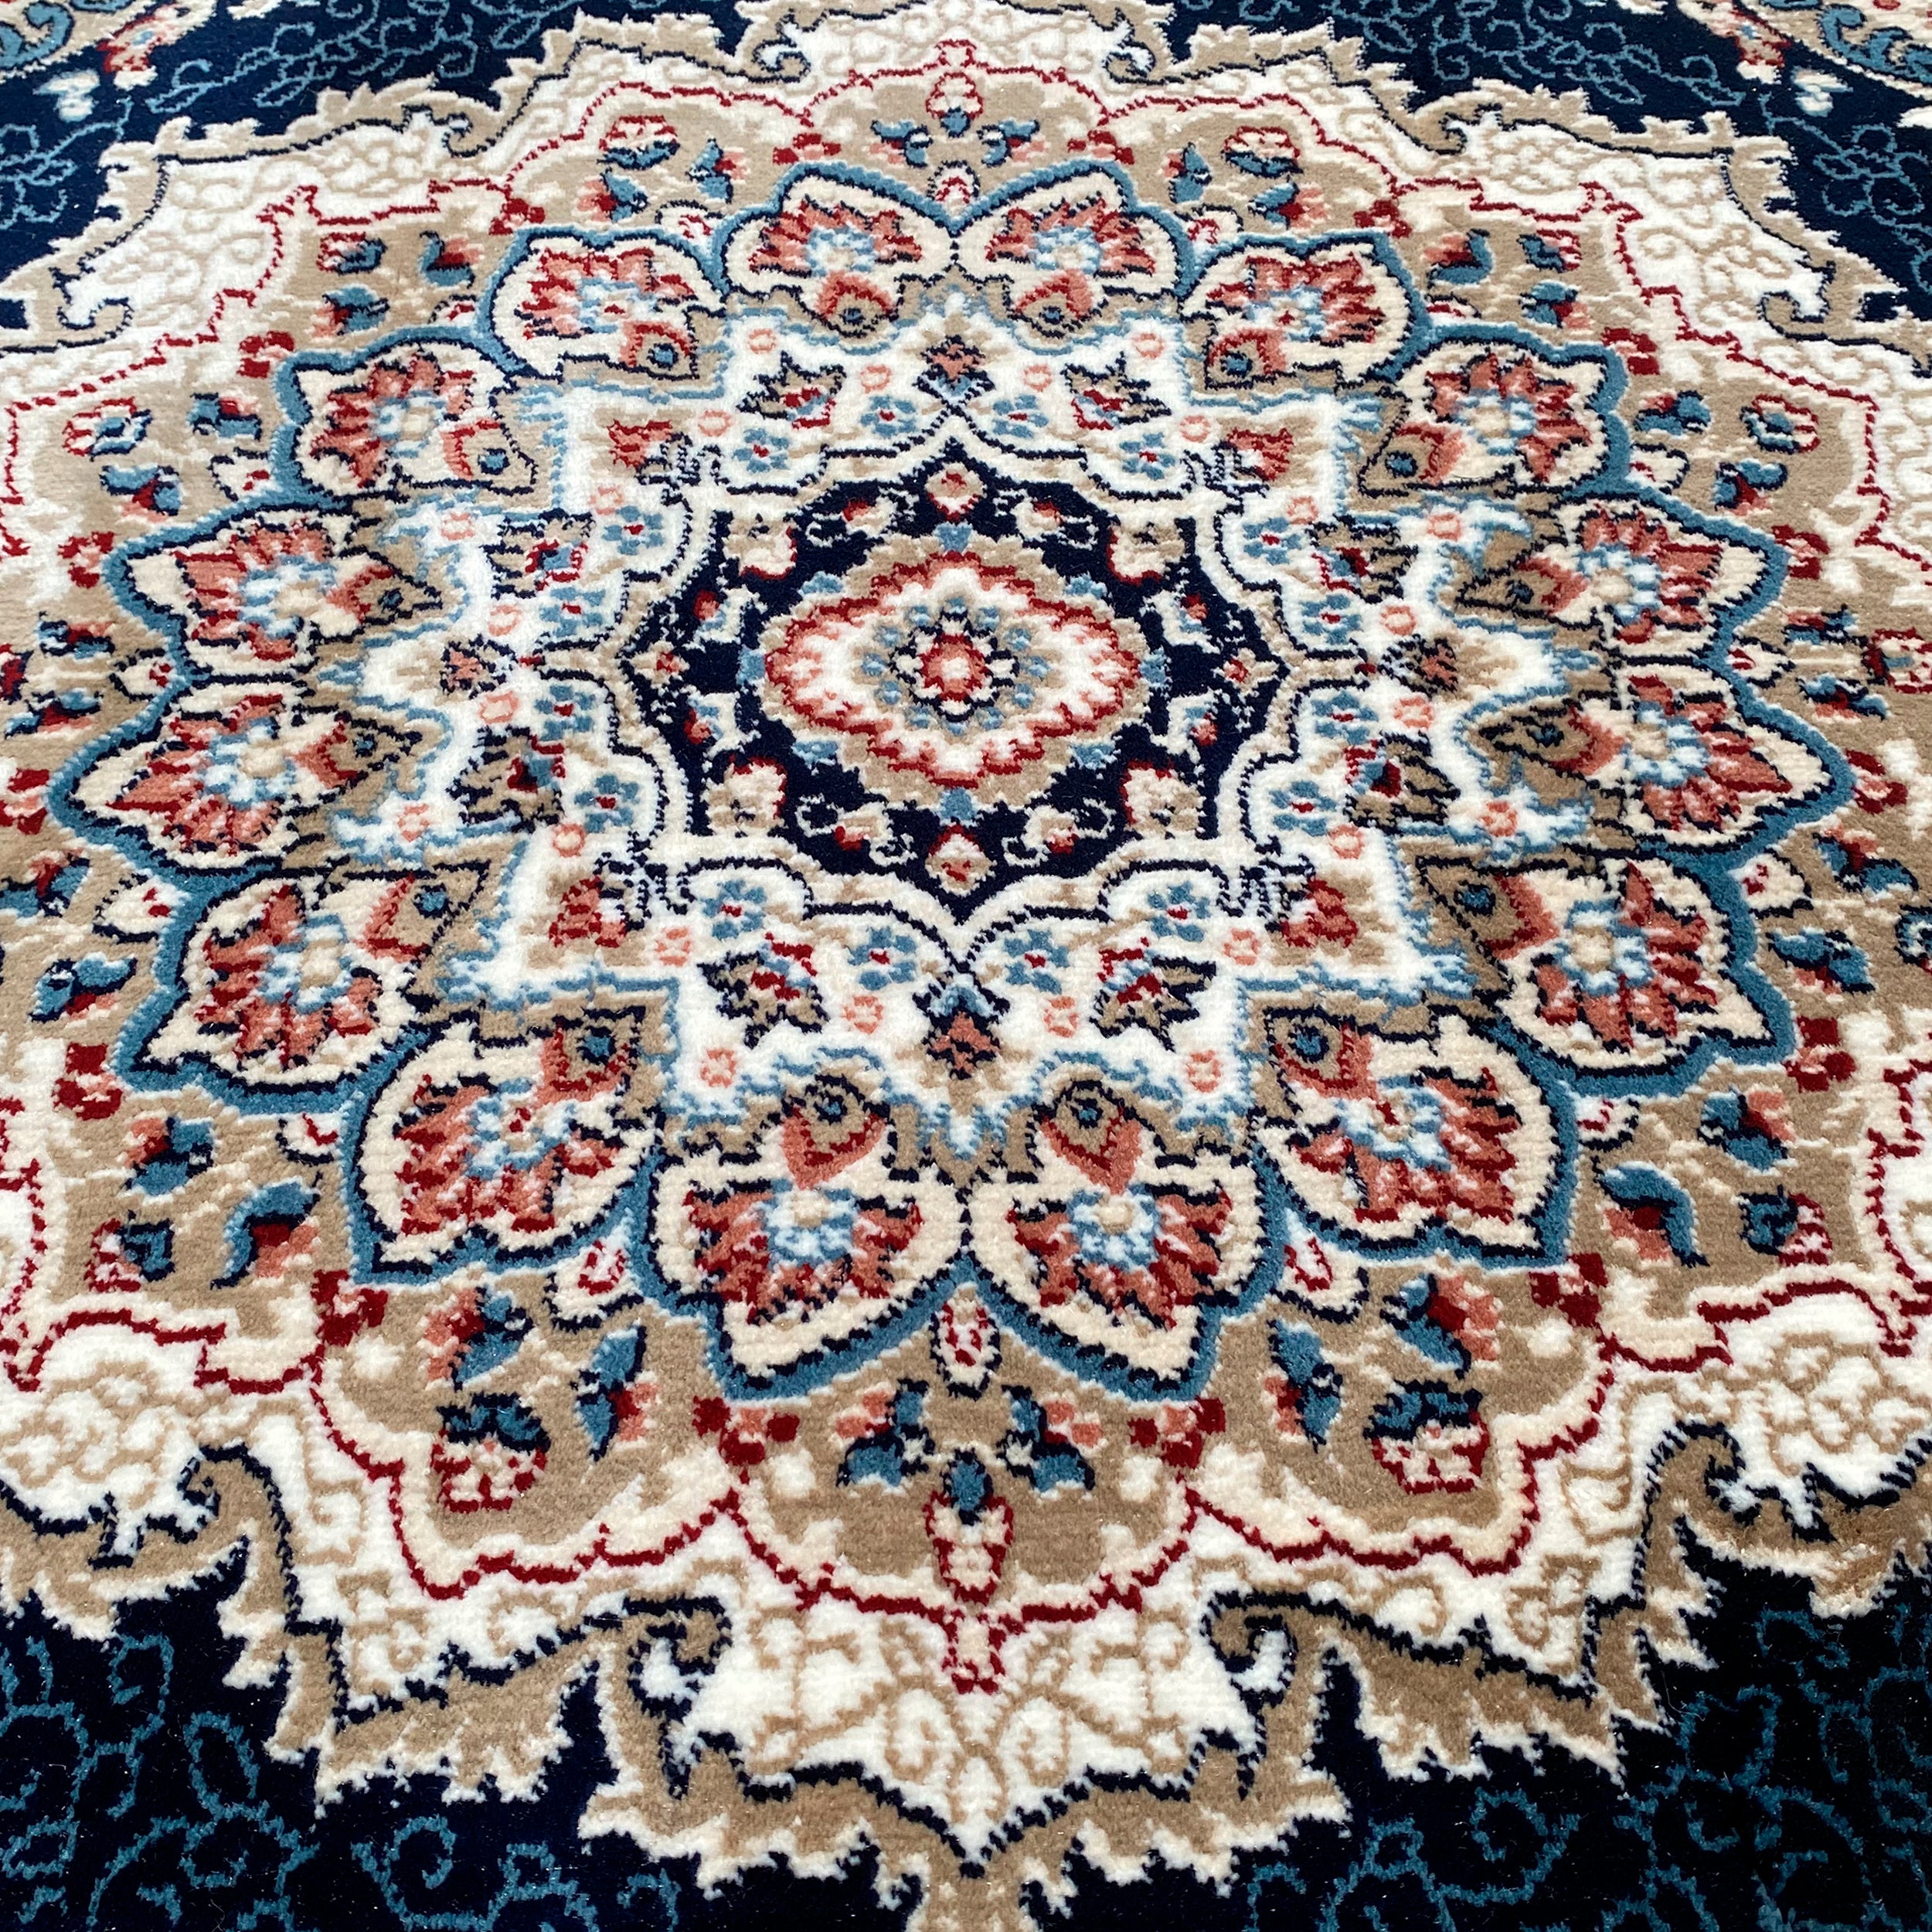 Traditional Navy Blue Vintage Area Rug, Brand: RugBerry, Collection: Kashan, Shape: Rectangular, Style: Tassel, Pattern: Vintage, Persian, Size: 5 x 7 ft, 8 x 10 ft, 9 x 12, Color: Navy Blue, Material: 100% Polyester Silk, Weave: Machine Made, Thickness: 0.5 inches, Room: Bedroom, Dining Room, Living Room, Hallway, Office, Kitchen, Bathroom, Entryway, Nursery, Kids Room